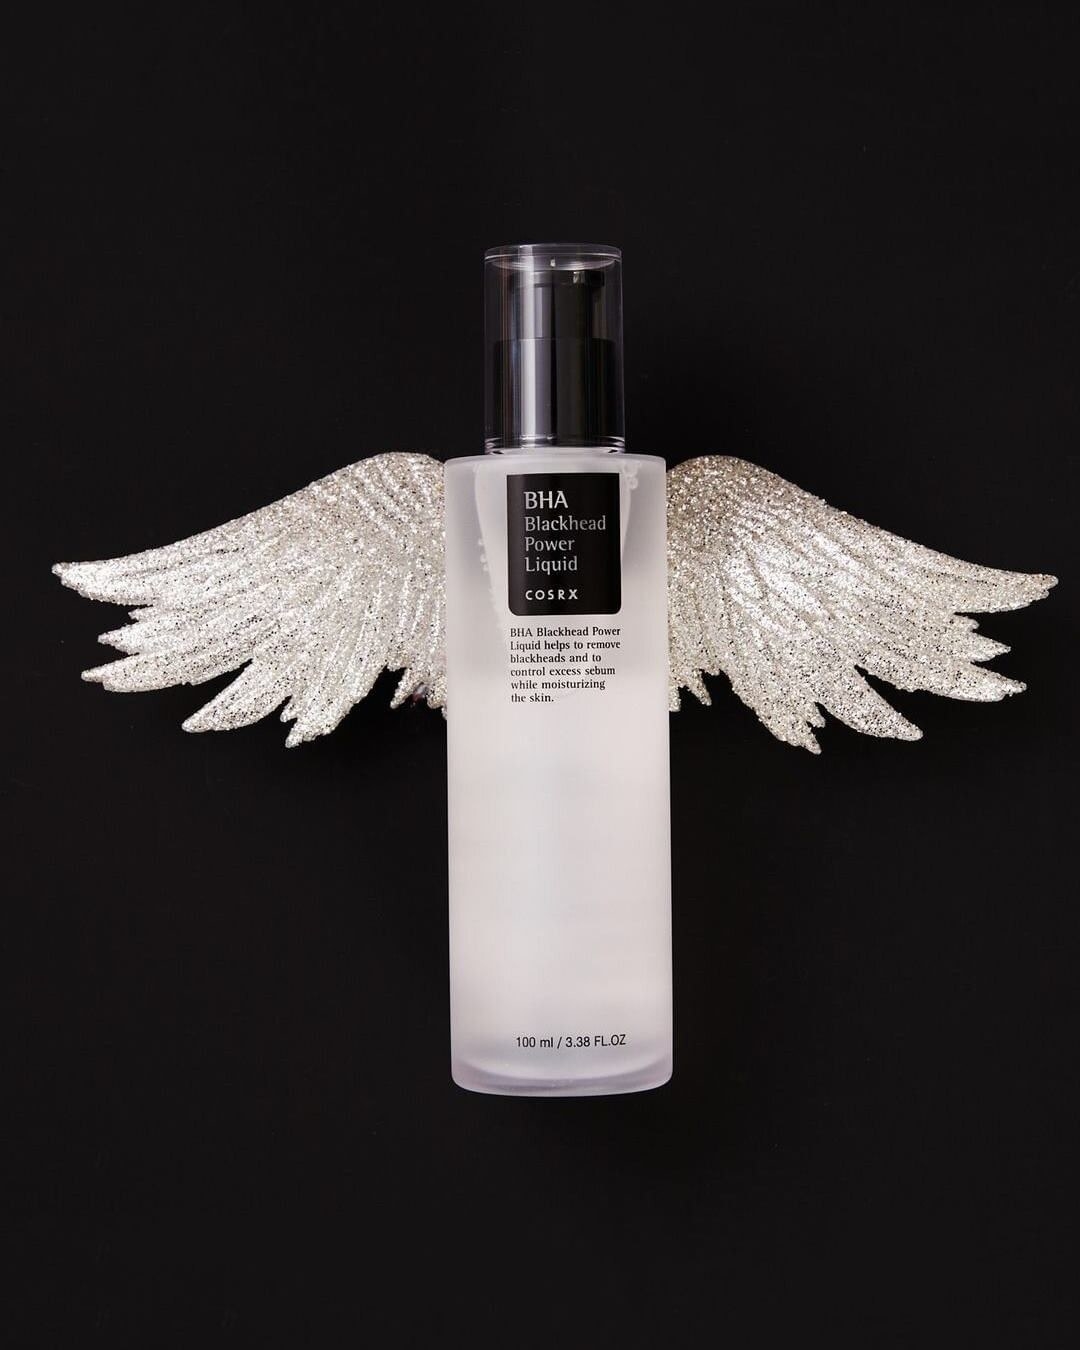 the bottle with angel wings graphic behind it